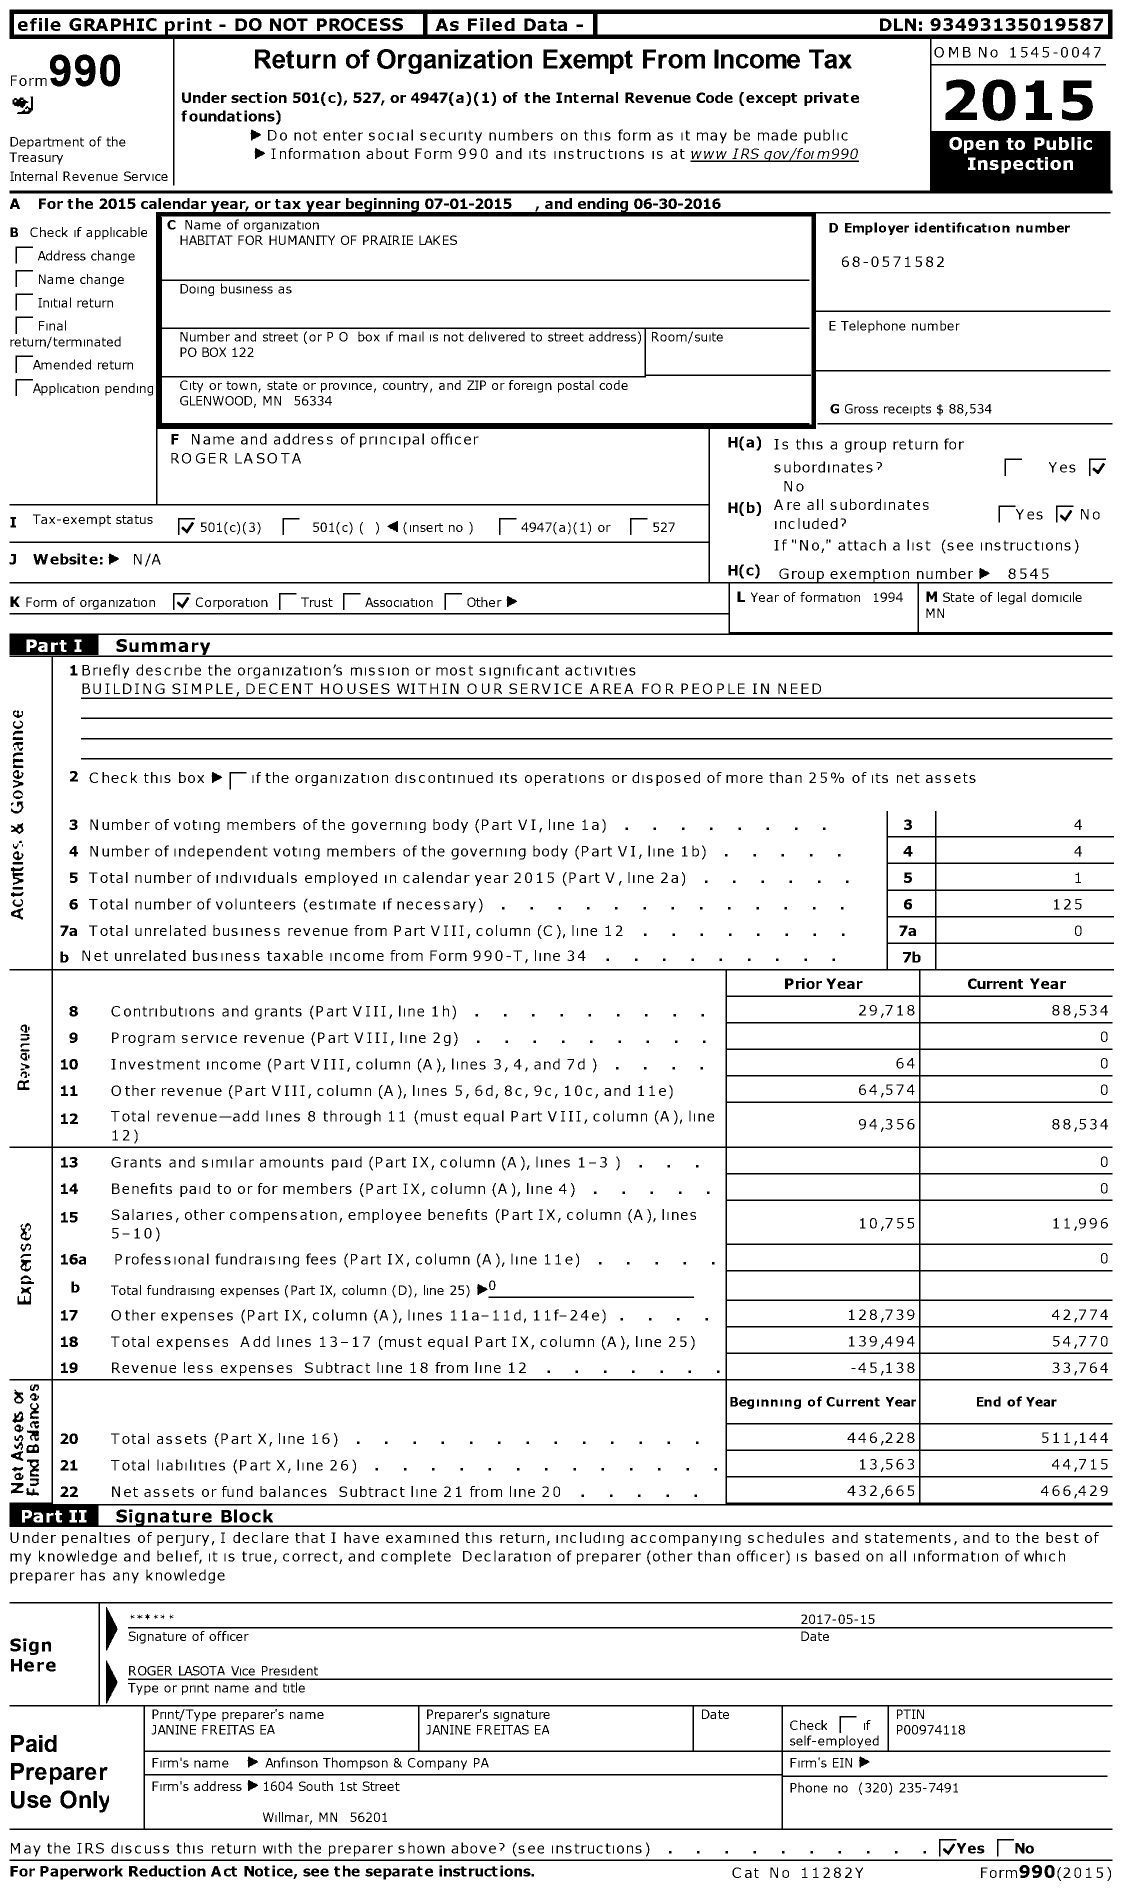 Image of first page of 2015 Form 990 for Habitat for Humanity of Prairie Lakes